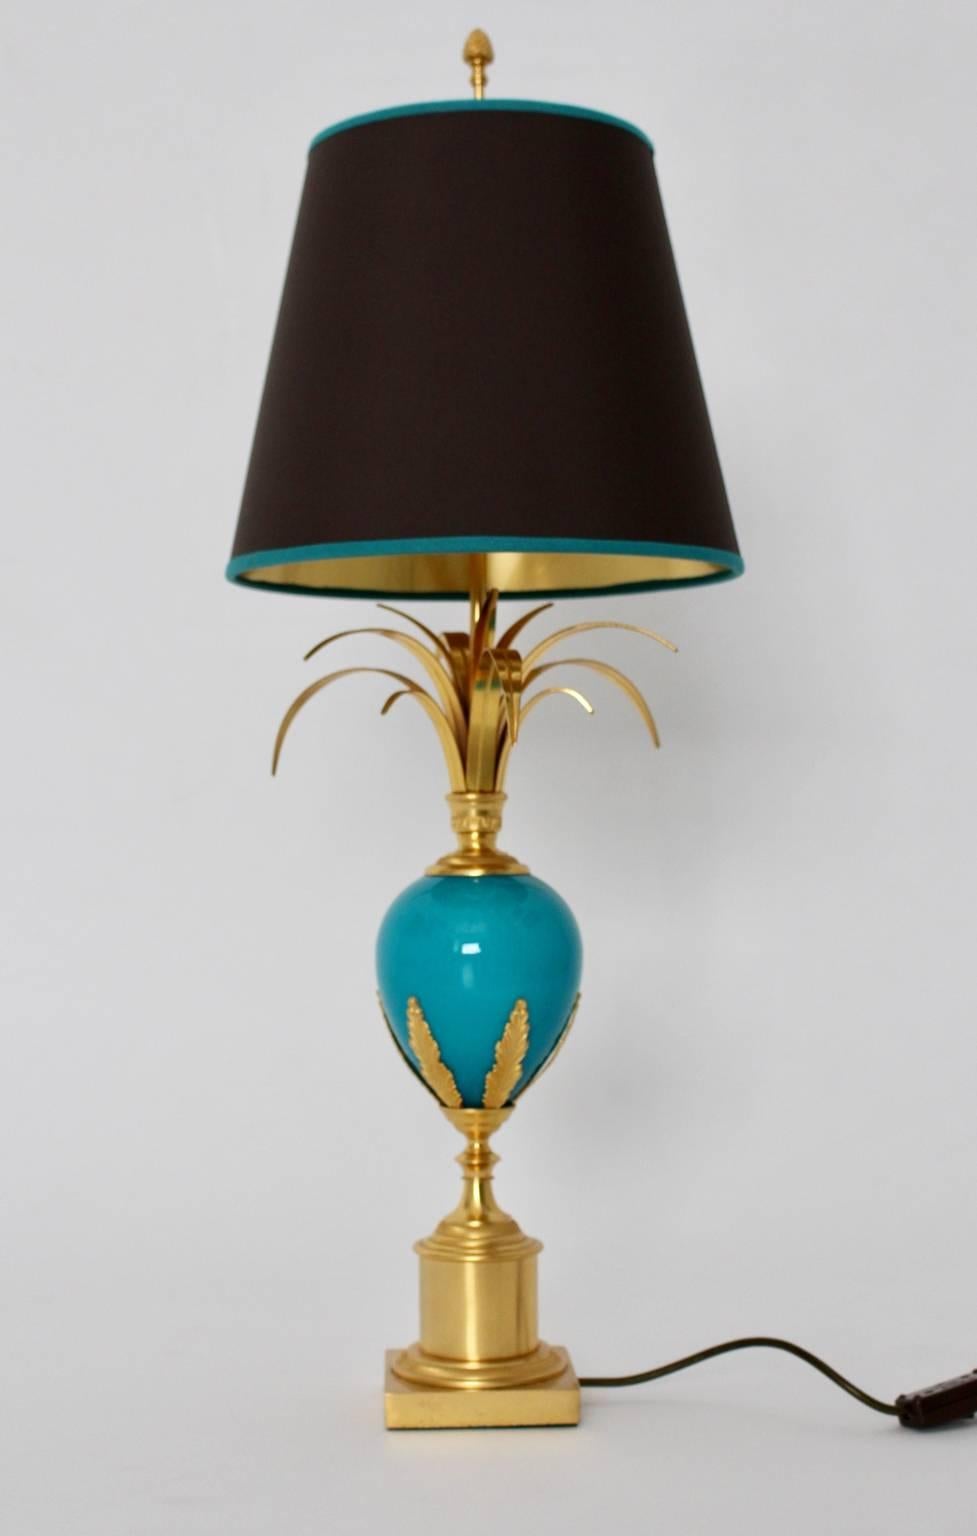 The table lamp in the style of Maison Charles was designed and manufactured circa 1970 in France.

The materials of the base are brass gilded and a turquoise glass egg decorated with brass gilded ornaments and stylized palm leaves.
The renewed